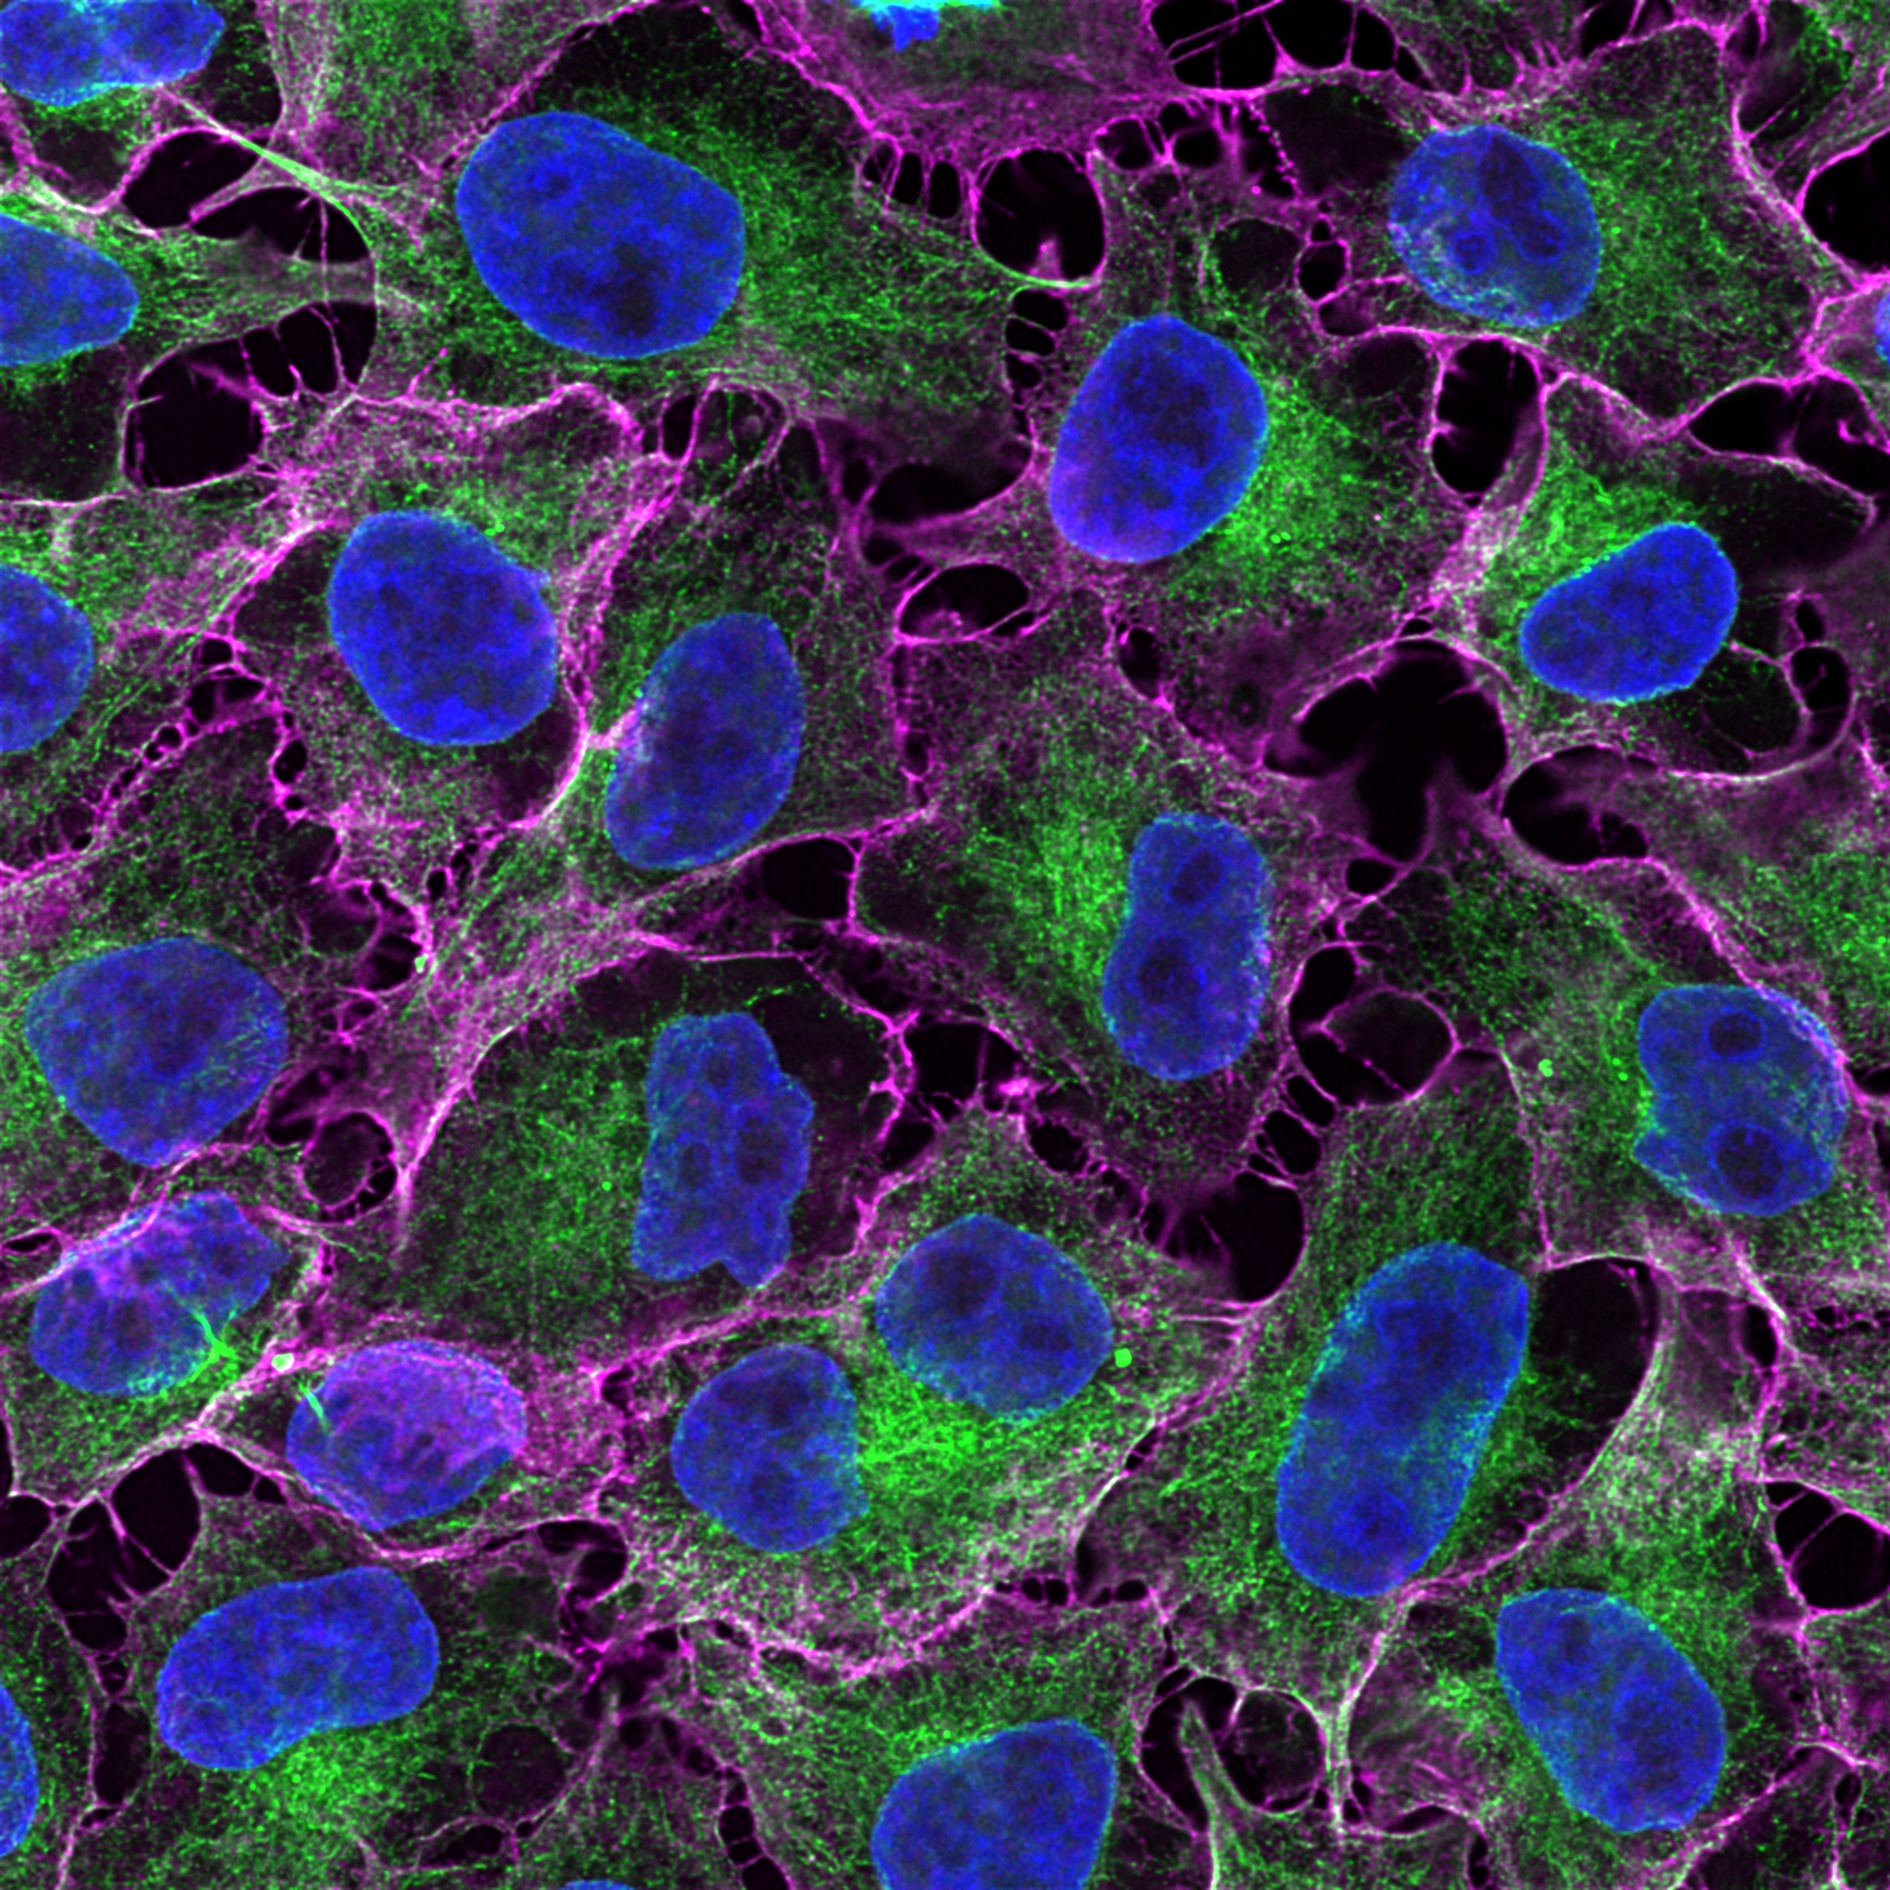 Immunofluorescence analysis of HeLa cells co-stained with mouse IgG2b anti-tubulin beta antibody and mouse IgG1 anti-CD147 antibody followed by Nano-Secondary® alpaca anti-mouse IgG2b, recombinant VHH, CoraLite® Plus 488 (smsG2bCL488-1, green) and Nano-Secondary® alpaca anti-mouse IgG1, recombinant VHH, CoraLite® Plus 647 (smsG1CL647-1, magenta). Nuclei were stained with DAPI (blue). Images were recorded at the Core Facility Bioimaging at the Biomedical Center, LMU Munich.